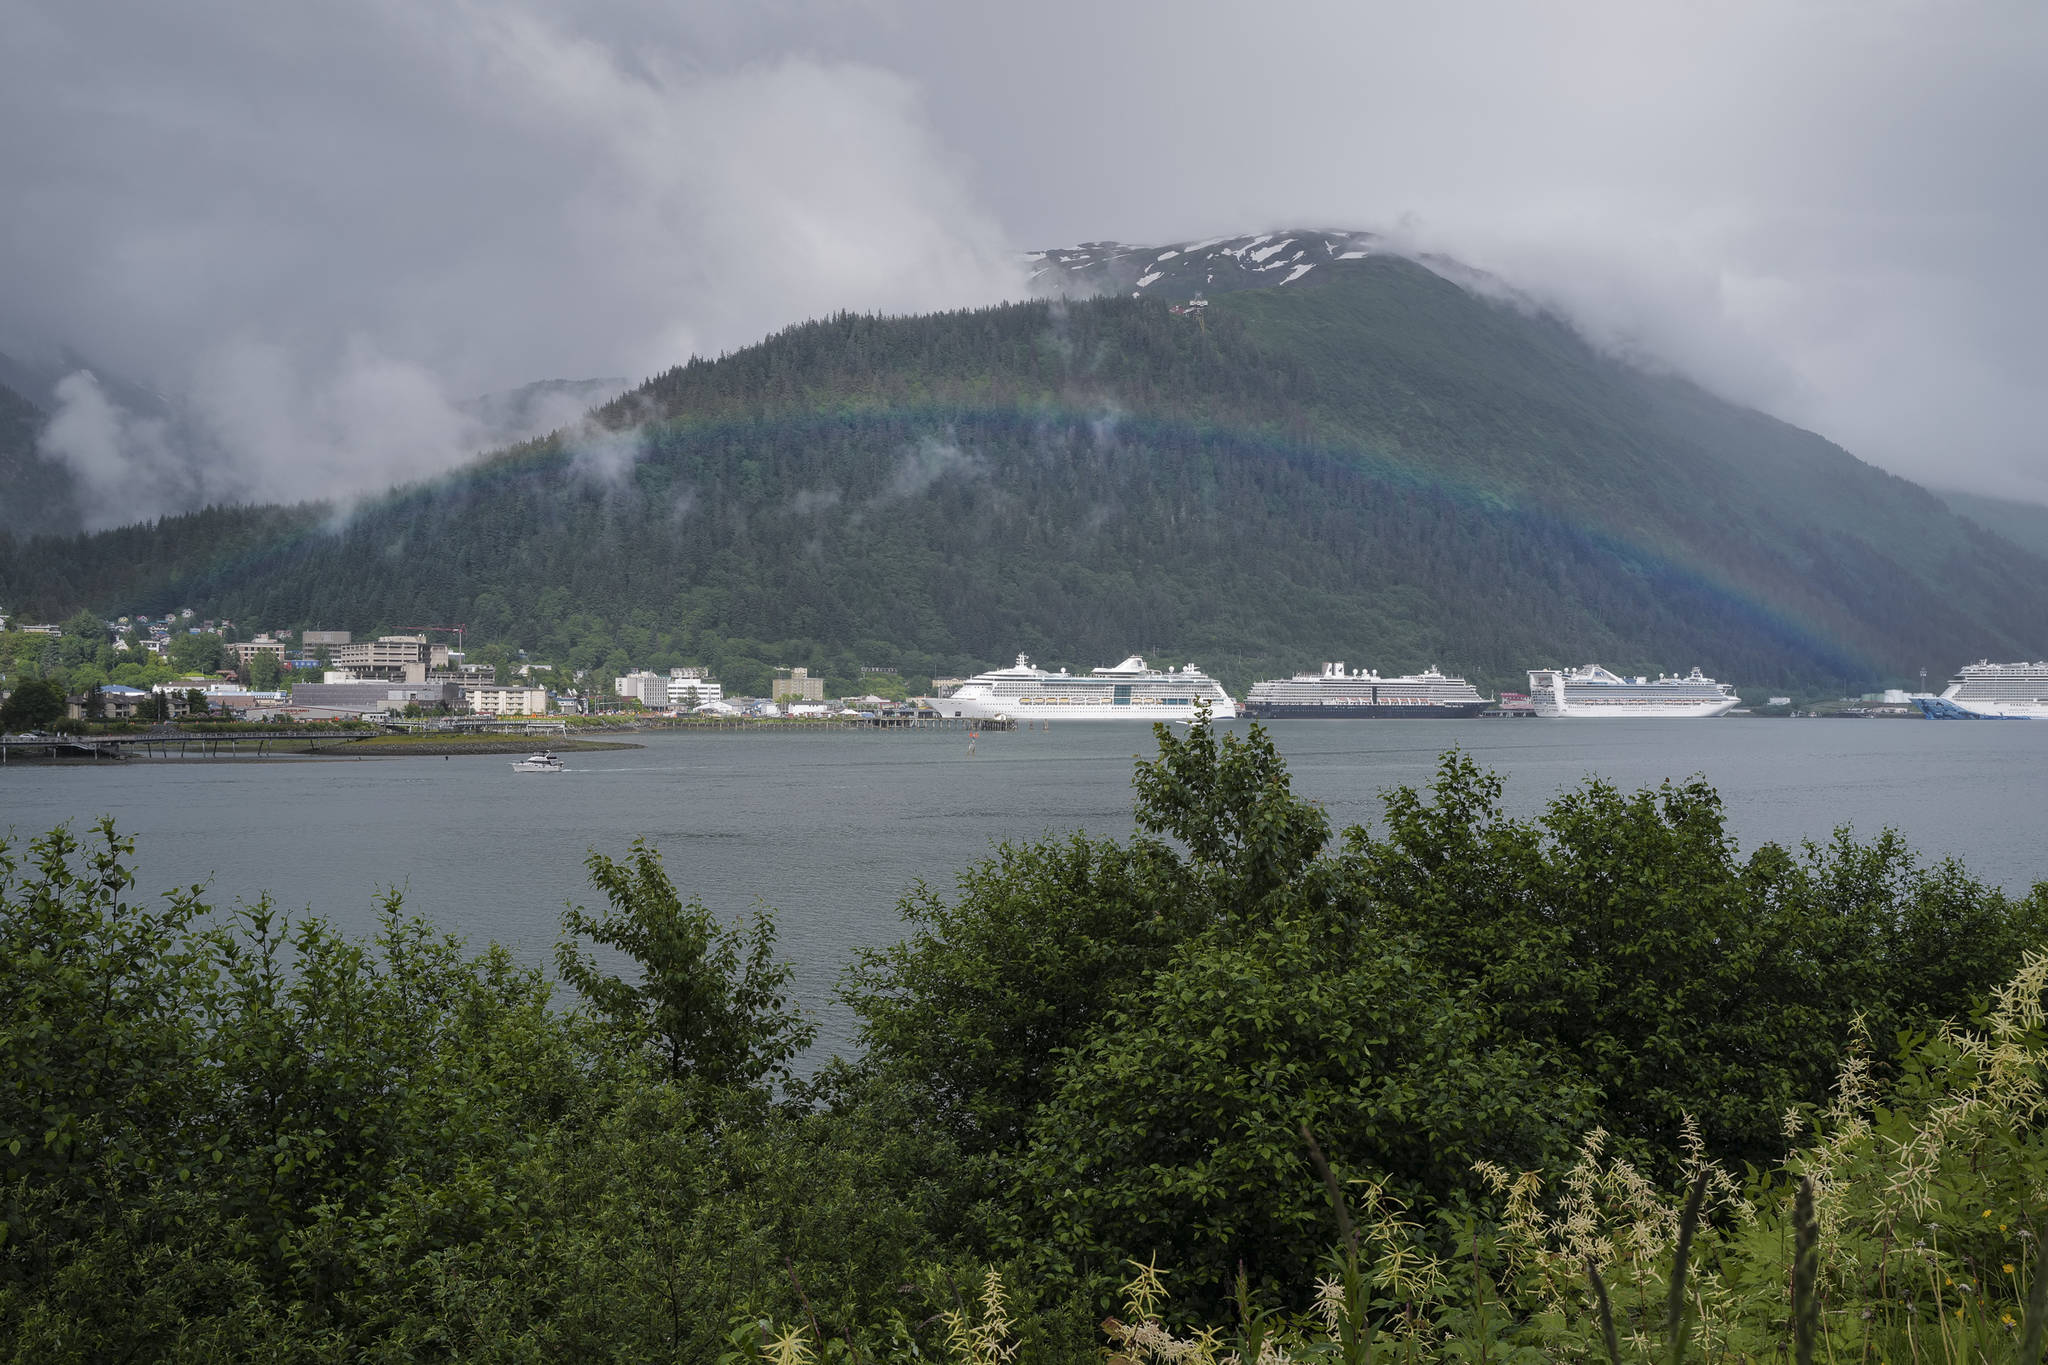 Want to help promote Juneau as Alaska’s capital? Here’s how